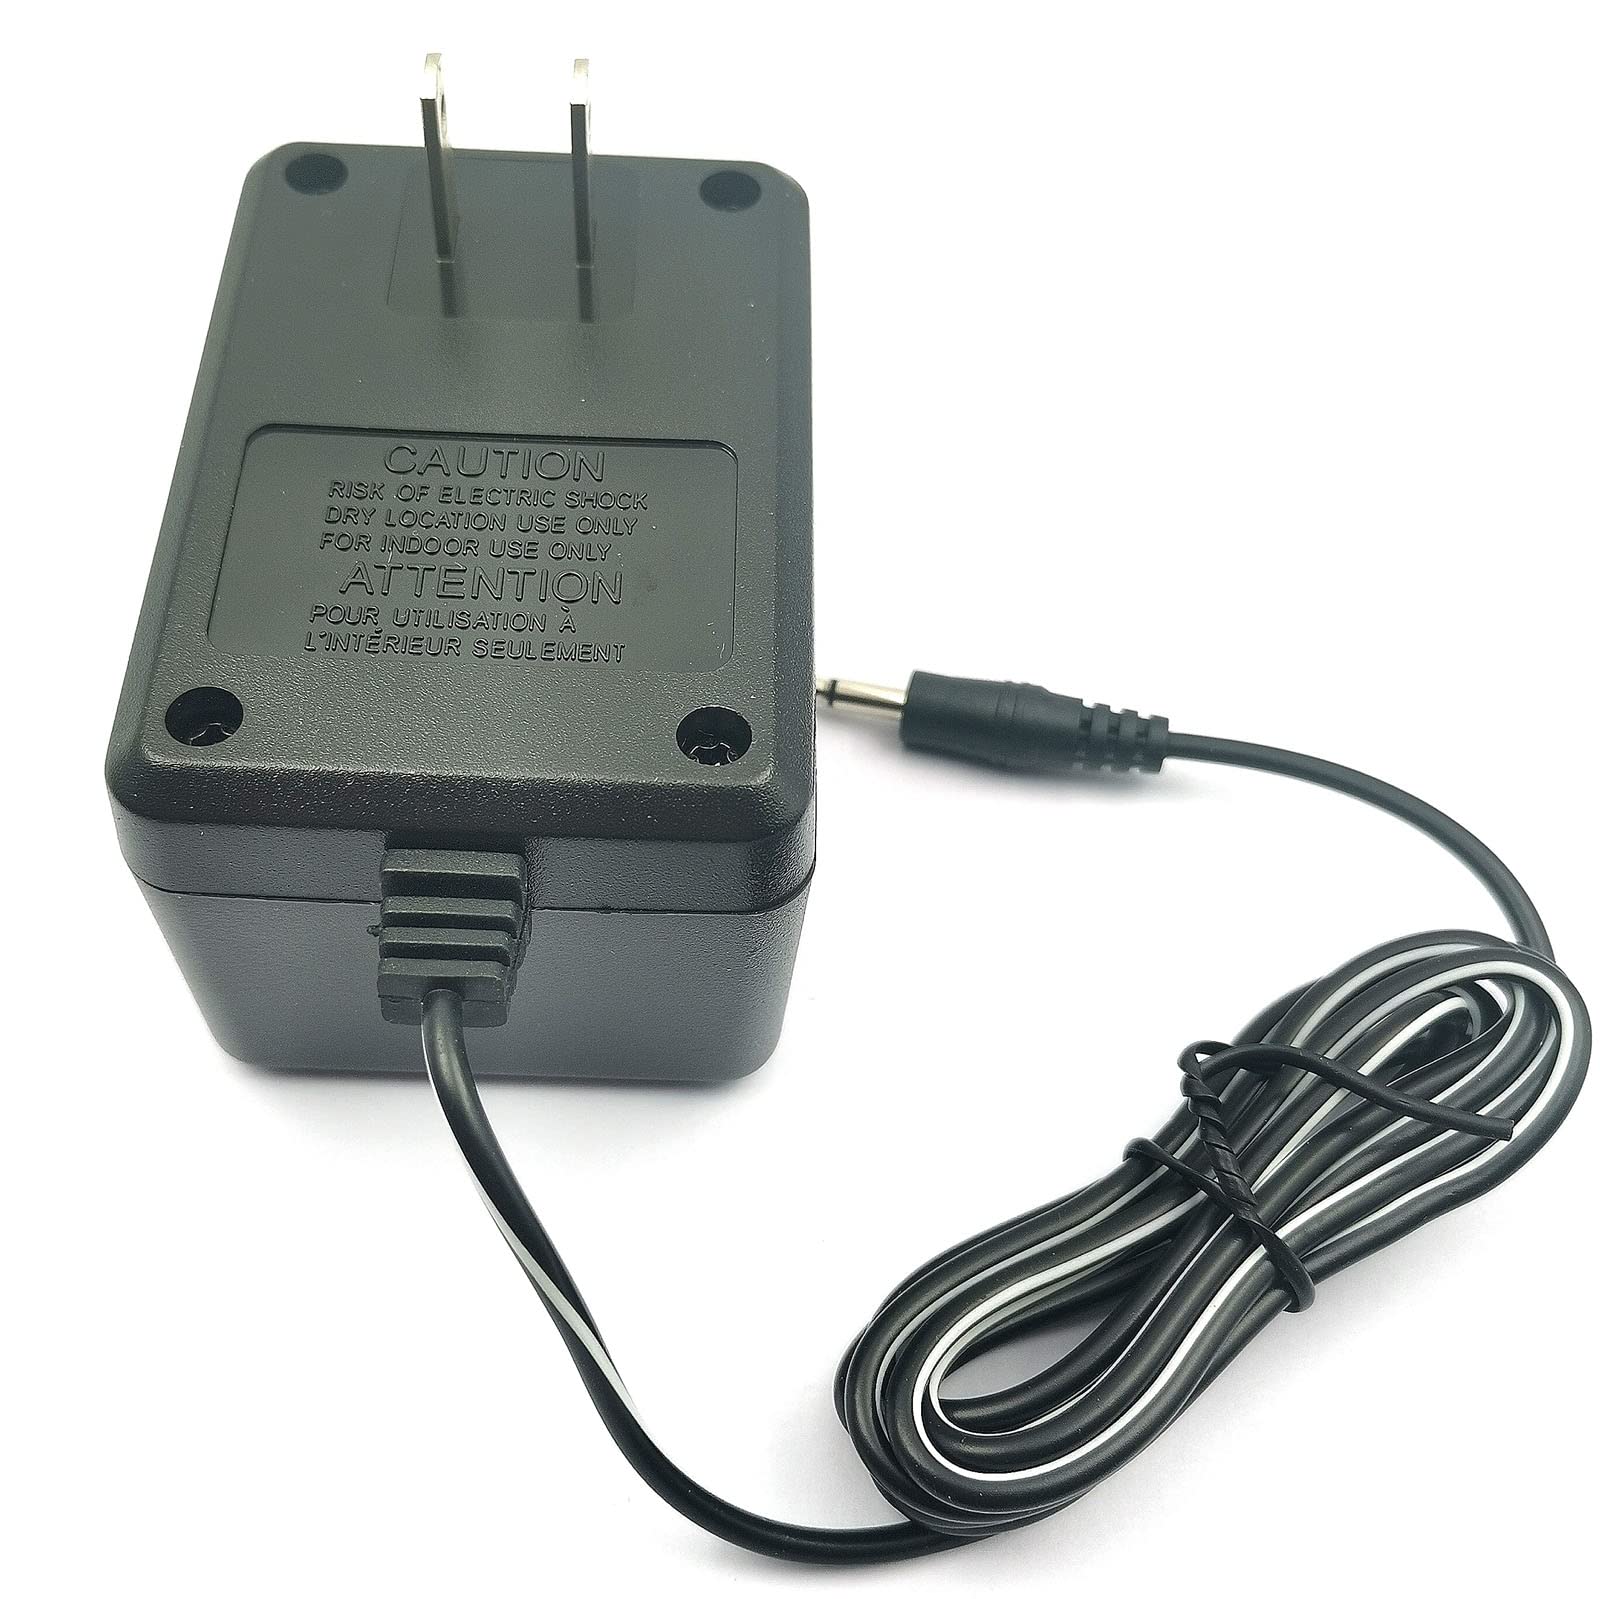 DEVMO New AC Power Supply Adapter Plug Cord Compatible with The Atari 2600 System Console